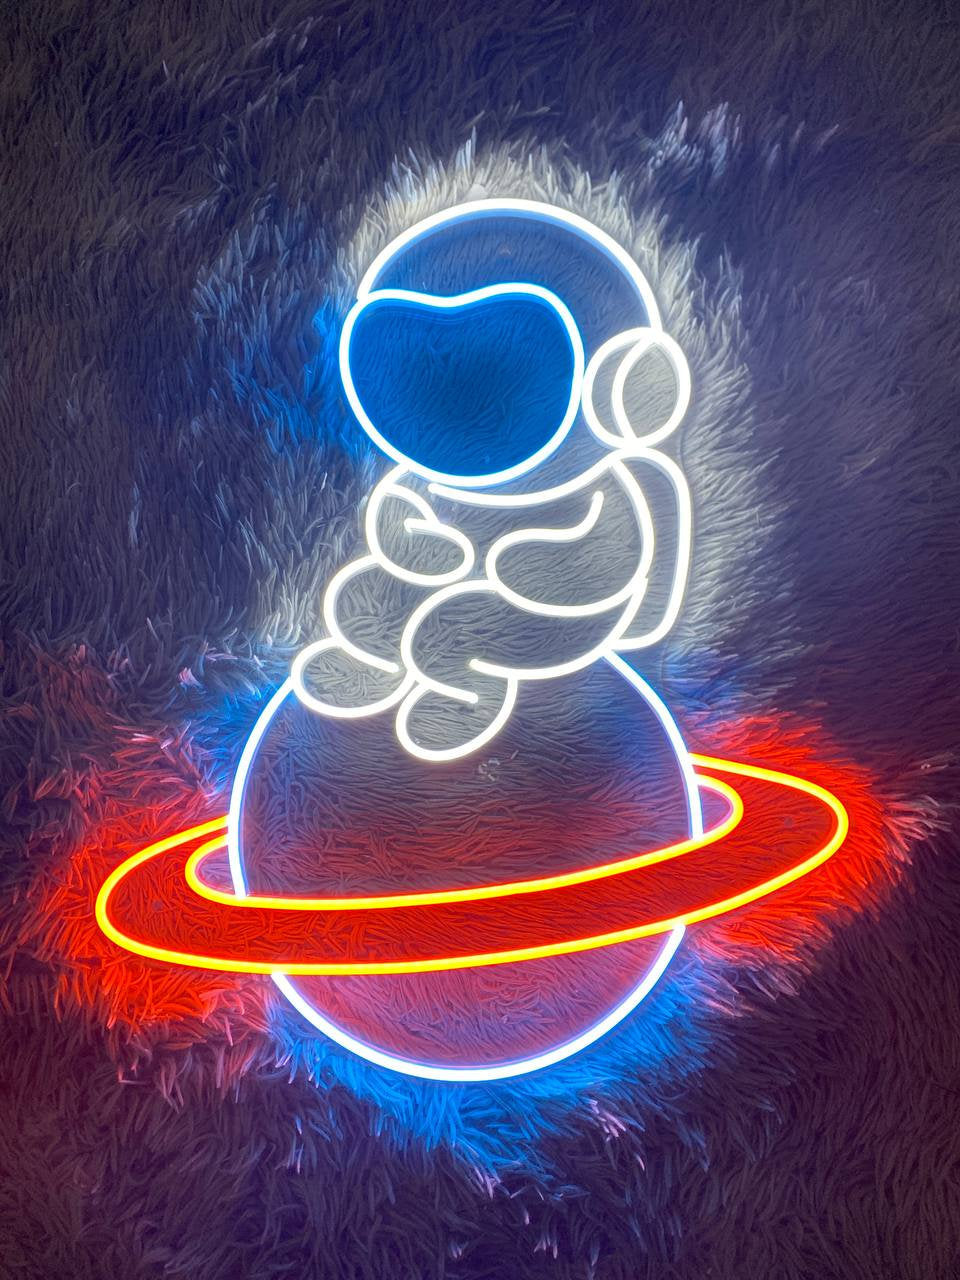 Astronaut on the planet Neon Sign